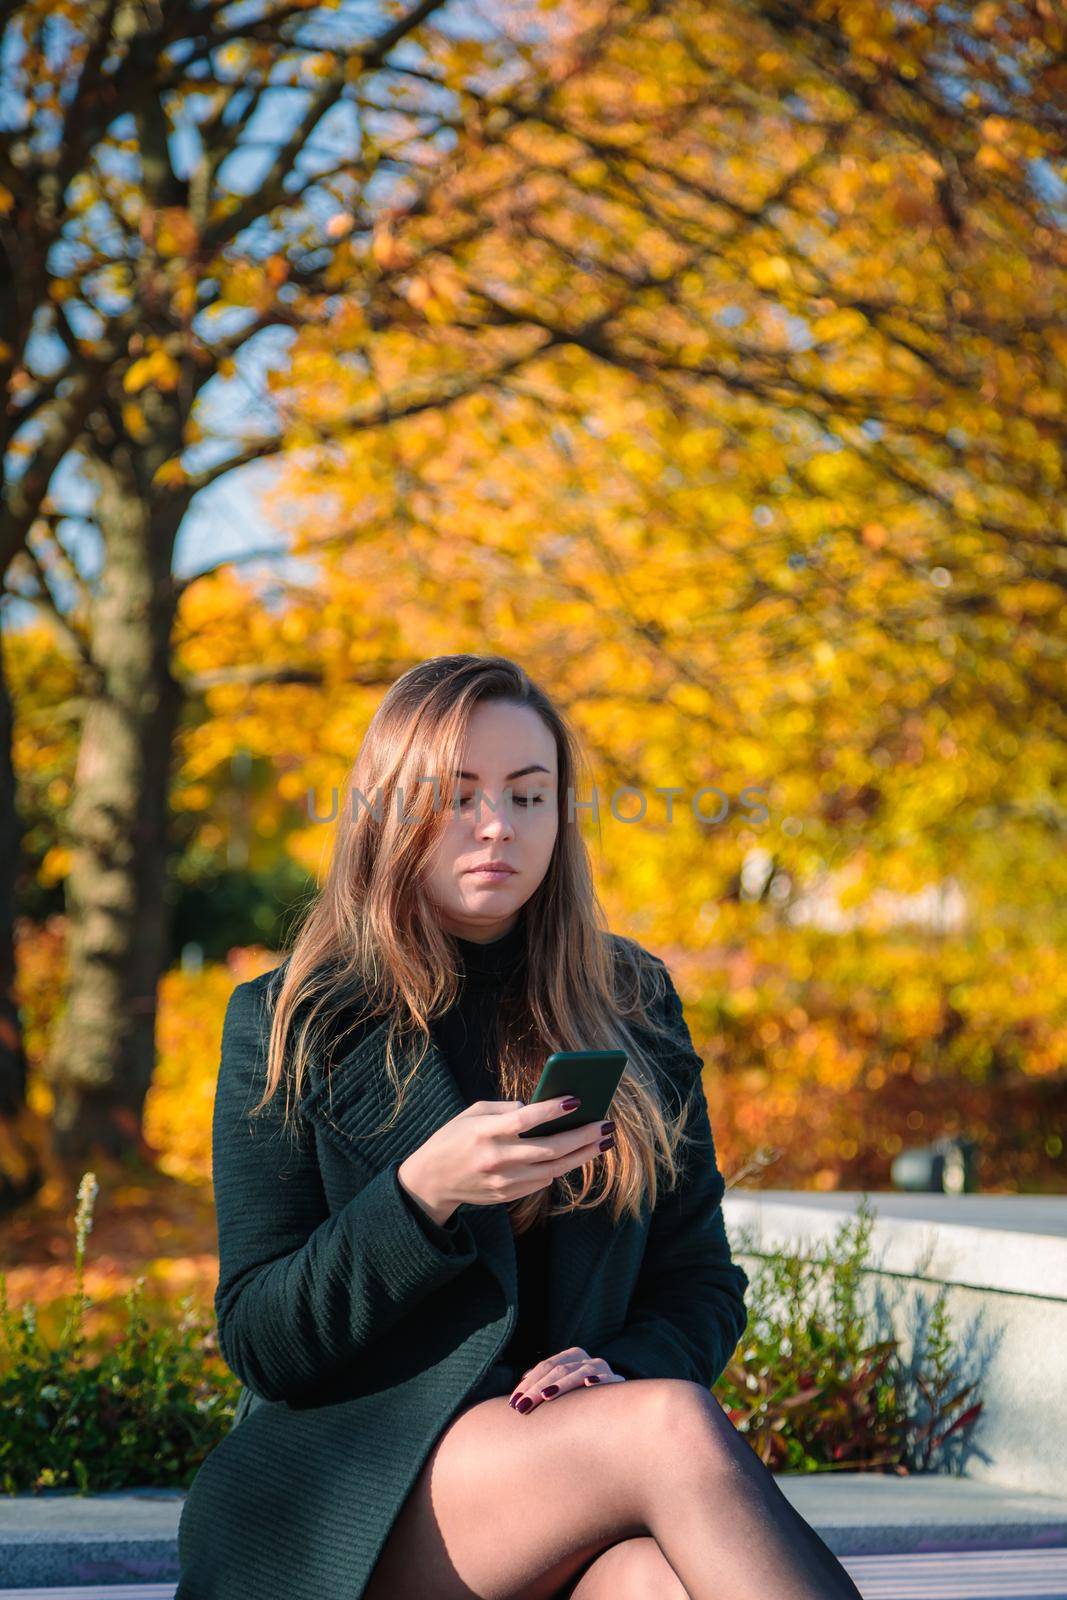 A woman with long hair sits on a bench in an autumn park and looks into a mobile phone. by Yurich32